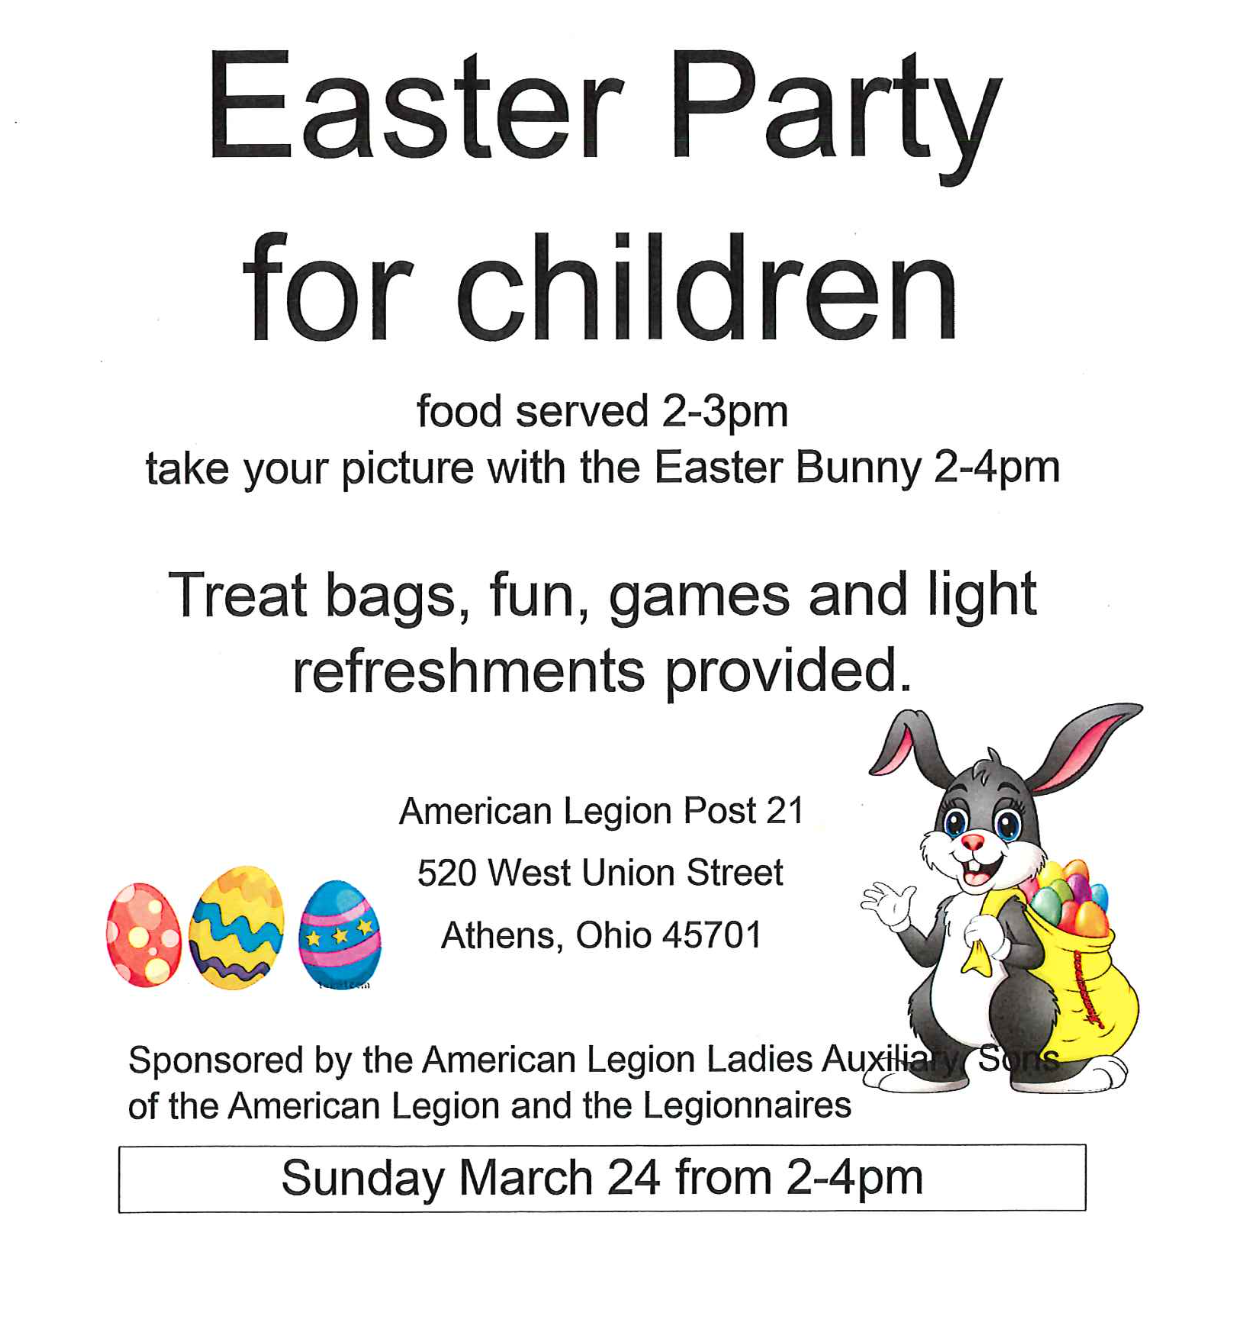 An image of a flyer for the Athens chapter of the American Legion's Easter Party for Children.